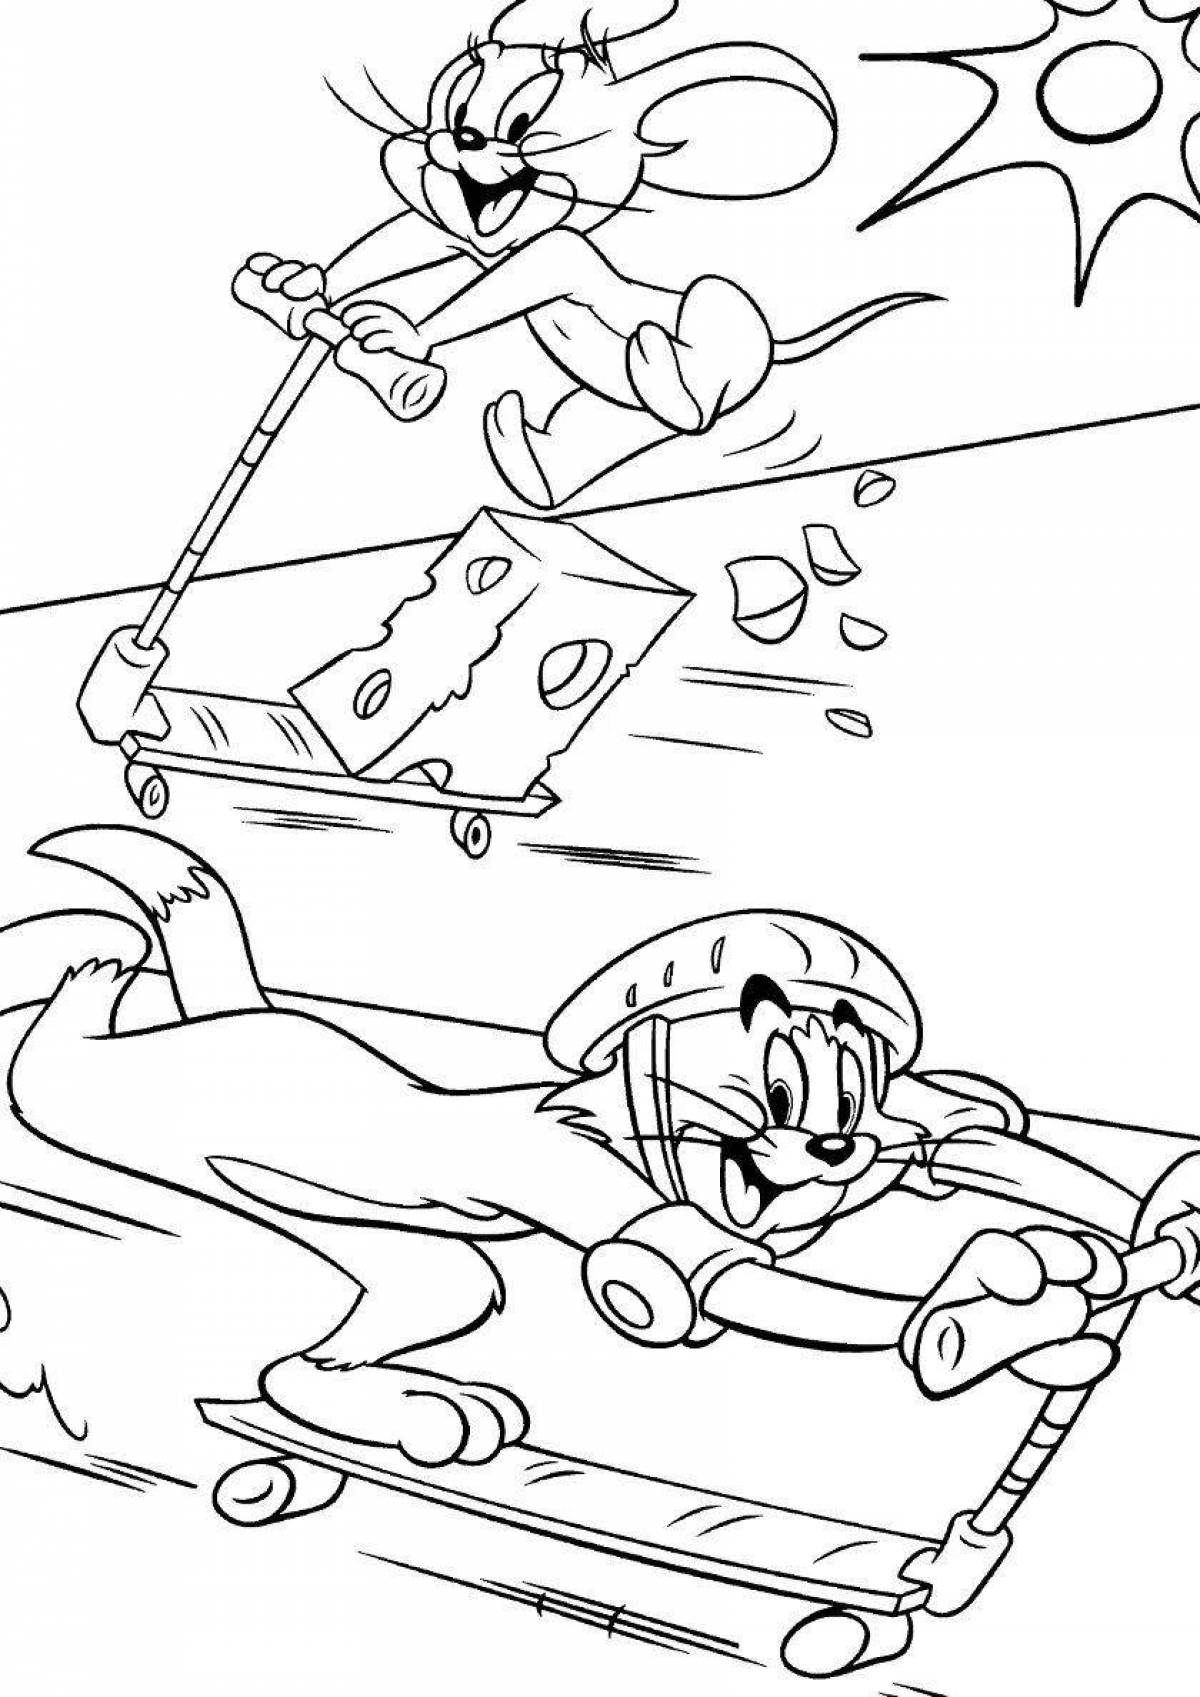 Color-crazy tom and jerry game coloring page